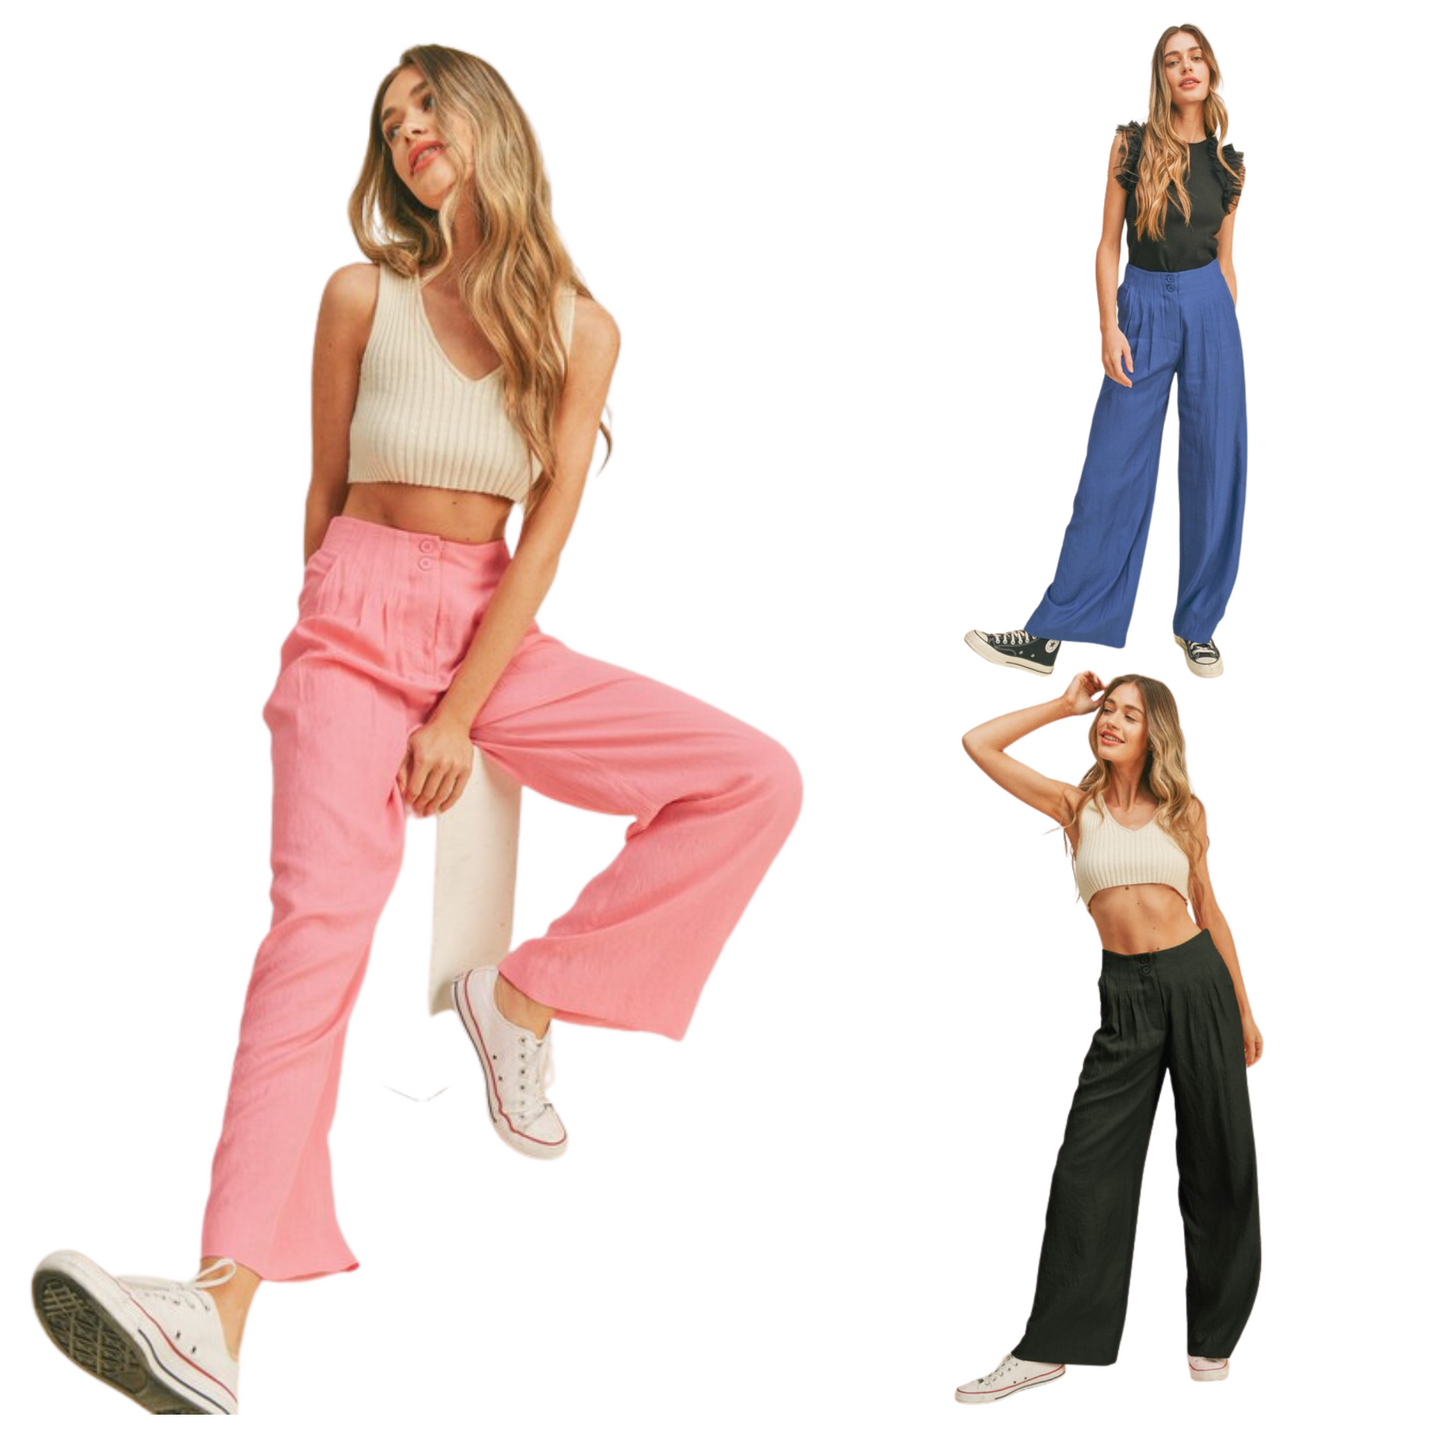 Our Wide Leg Trousers feature a pleated high rise waist, zip up closure with button, plus elastic waistband on back for a comfortable fit. Crafted with two side pockets, these trousers are available in pink, black, and royal blue colors. Style with a blouse for an elevated look.